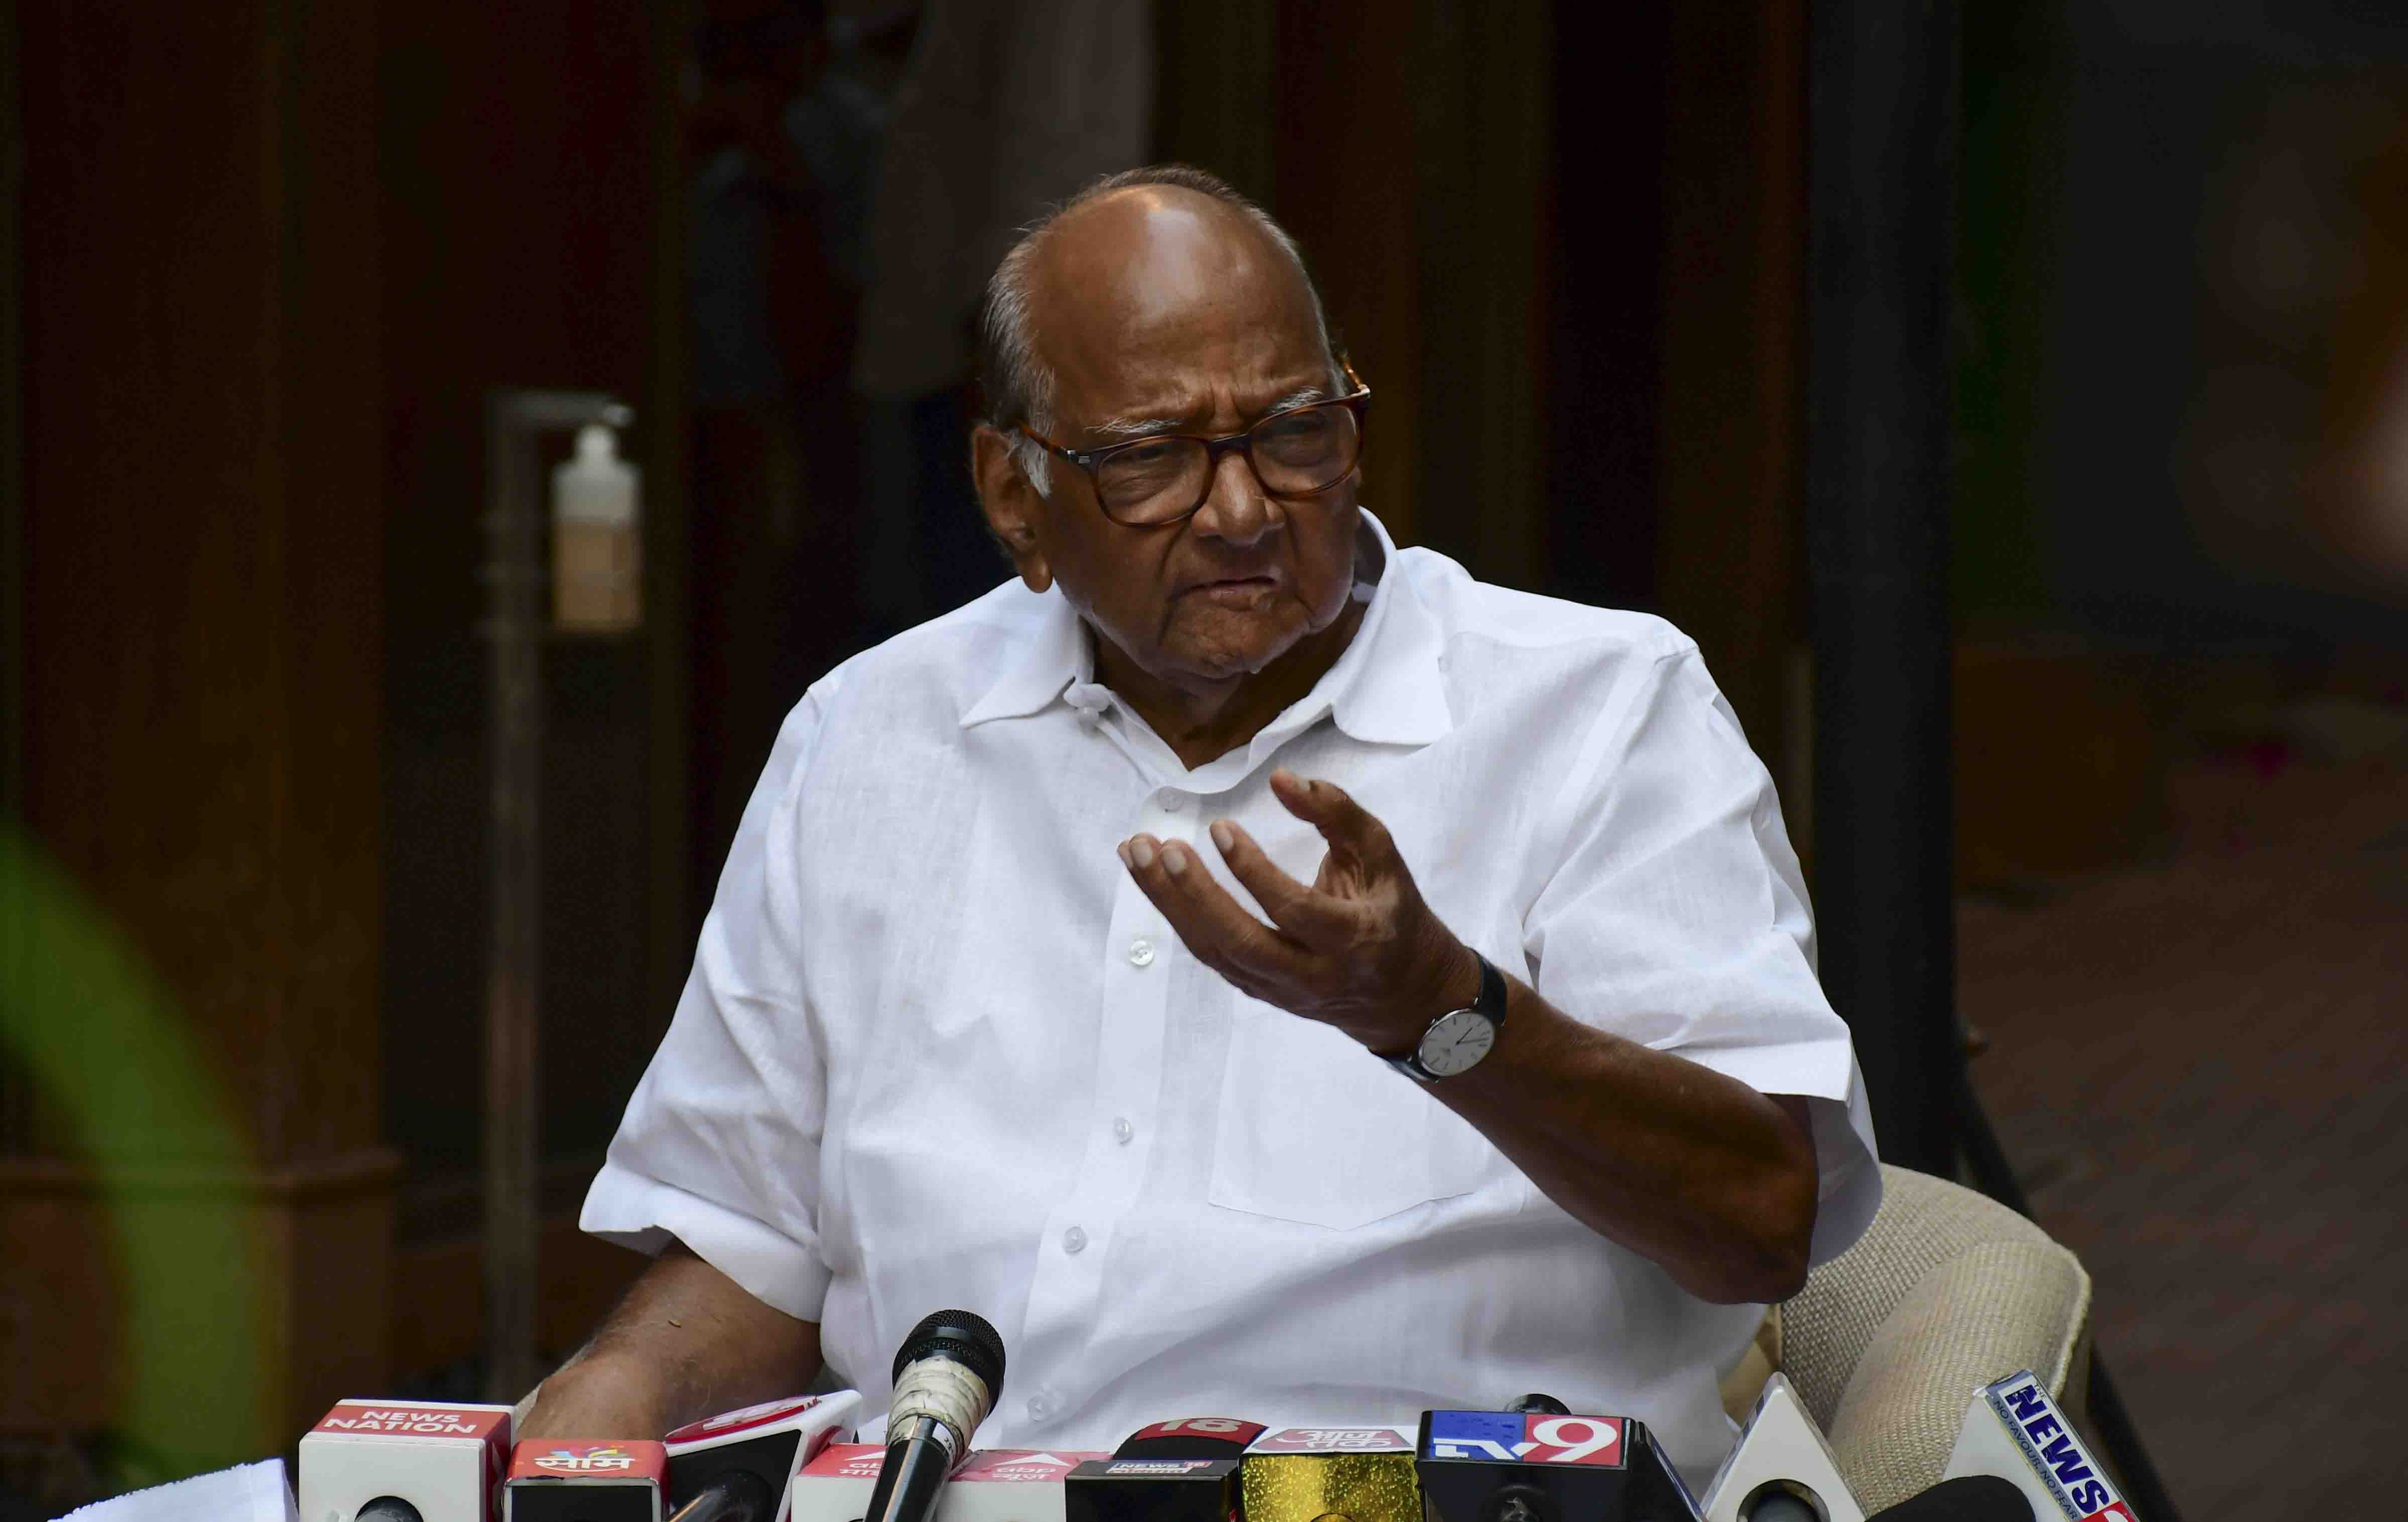 Don't commit 'sin' of using force against protesters: NCP president Sharad Pawar